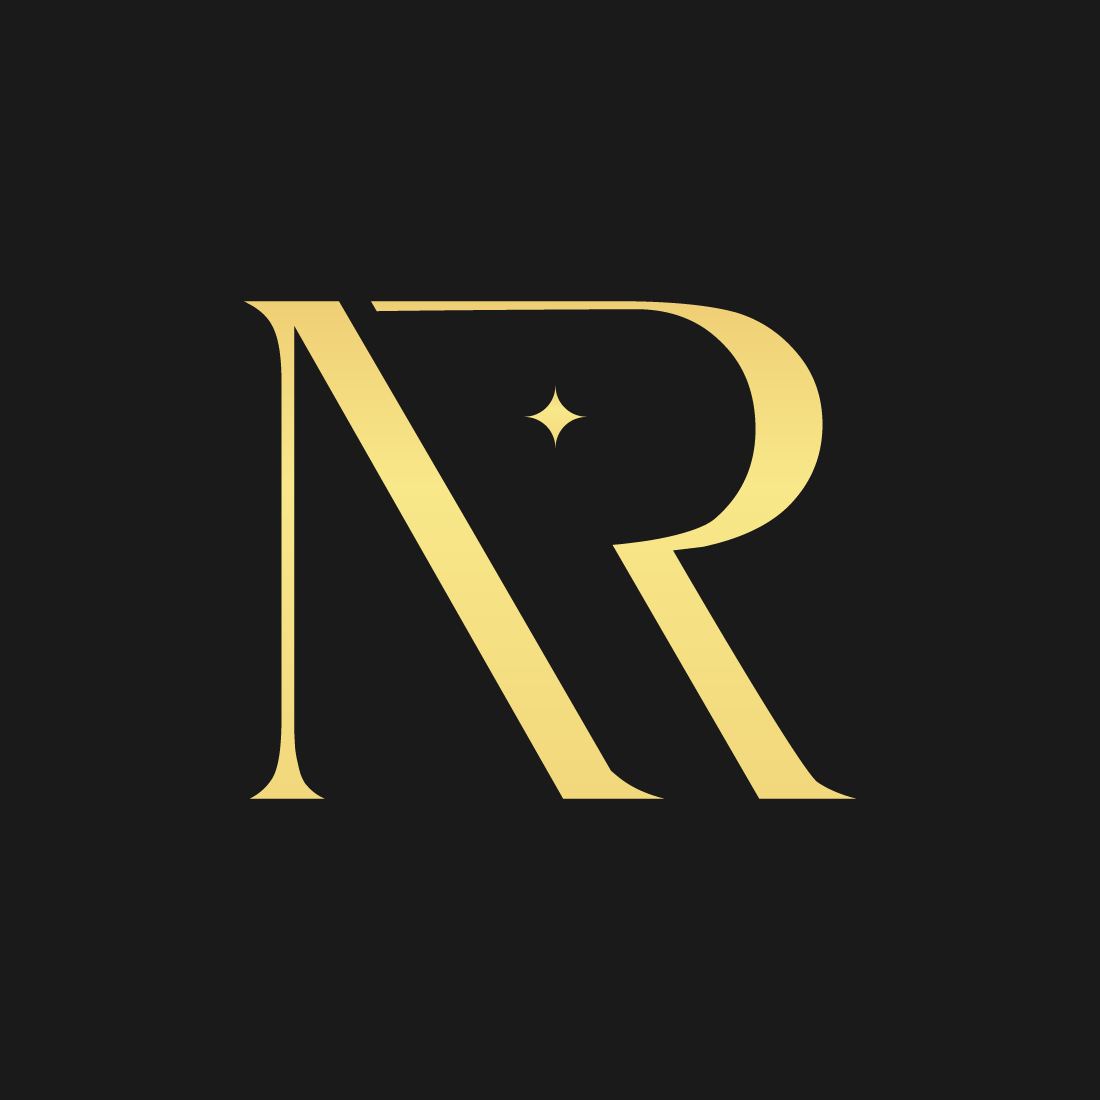 NR luxury logo design preview image.